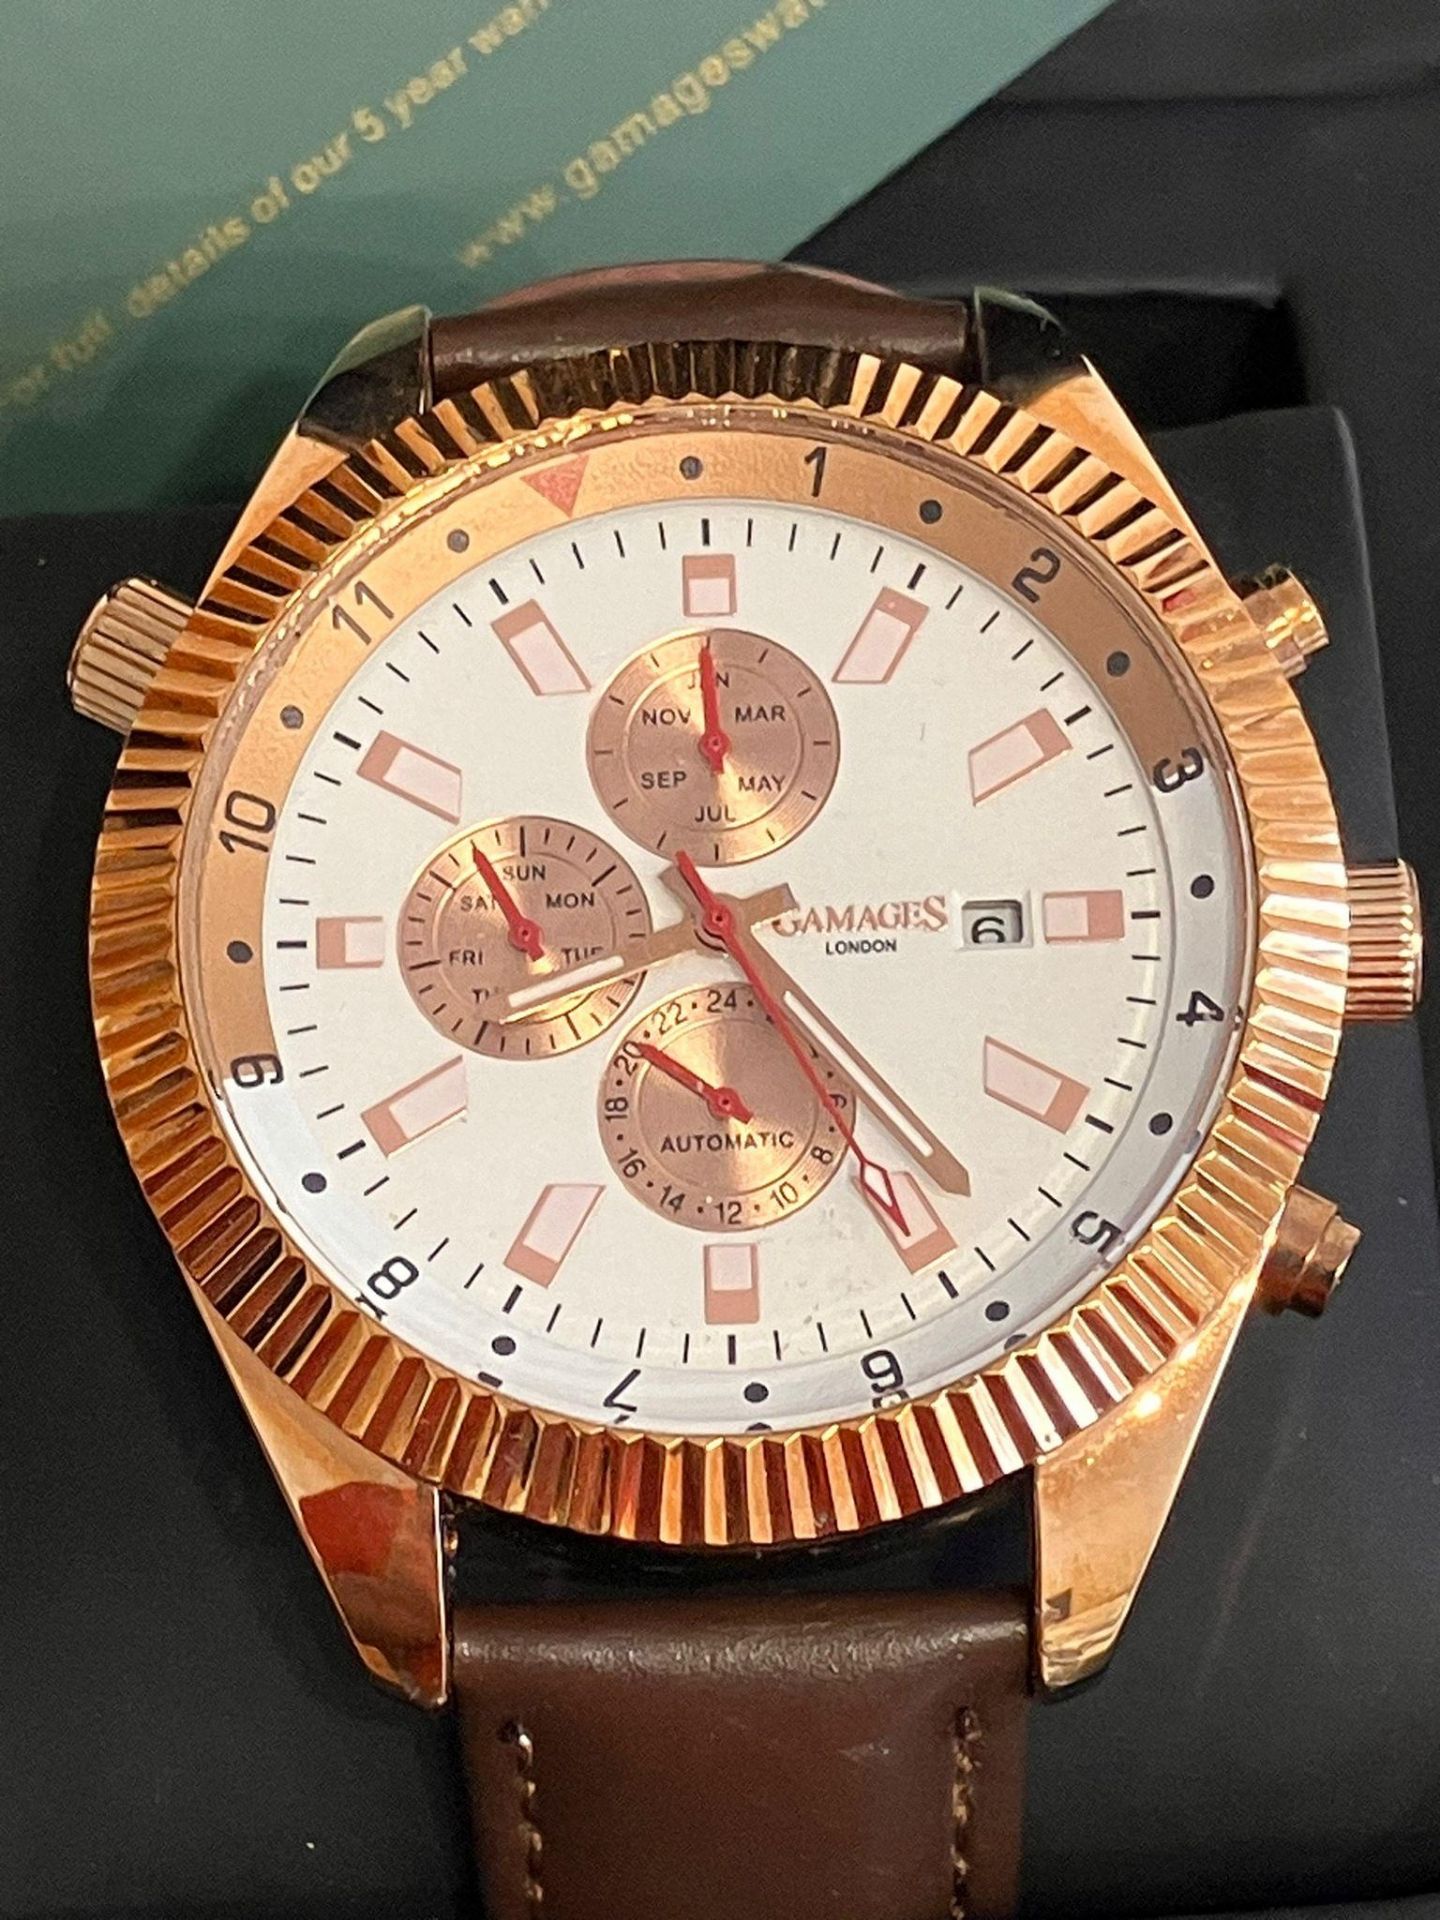 GAMAGES LONDON AUTOMATIC CHRONOGRAPH.ROTATOR LIMITED EDITION 8400. Skeleton back. Brown leather - Bild 3 aus 7